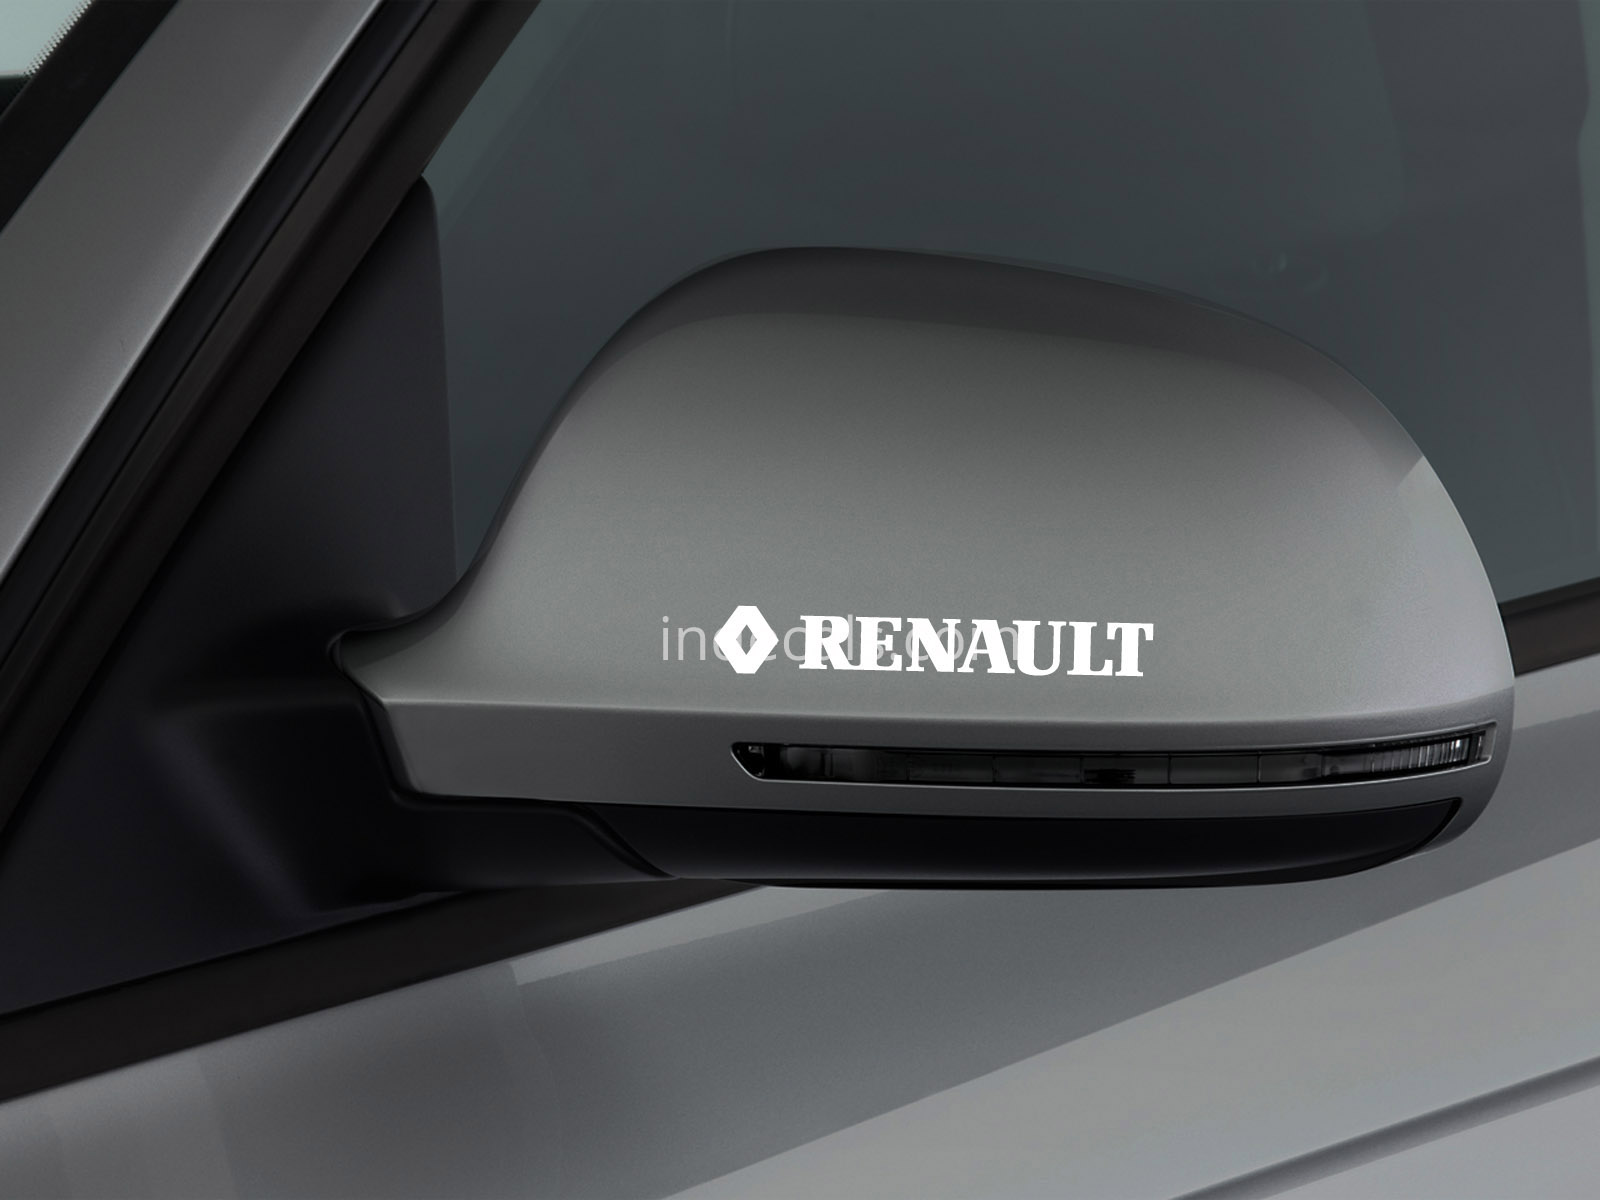 3 x Renault Stickers for Mirror - White